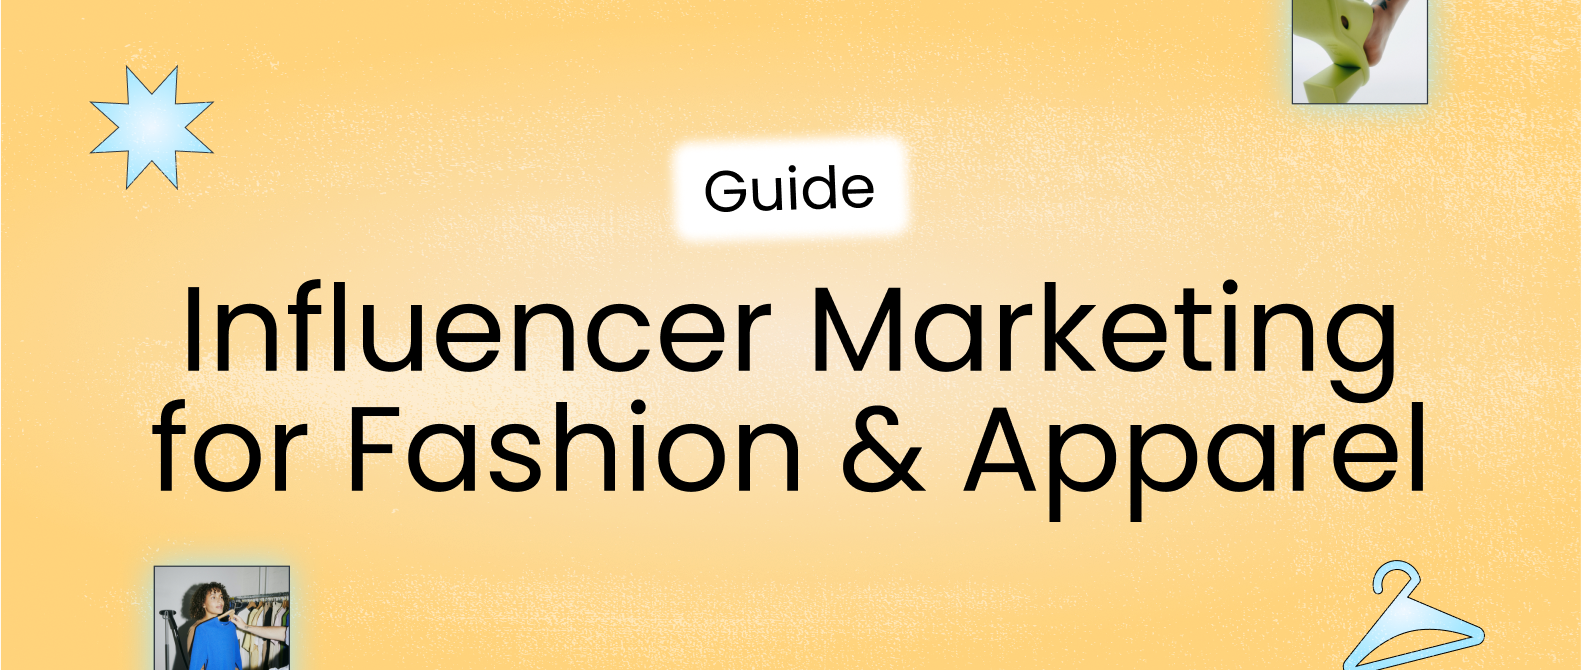 Free influencer marketing guide for fashion and apparel brands.